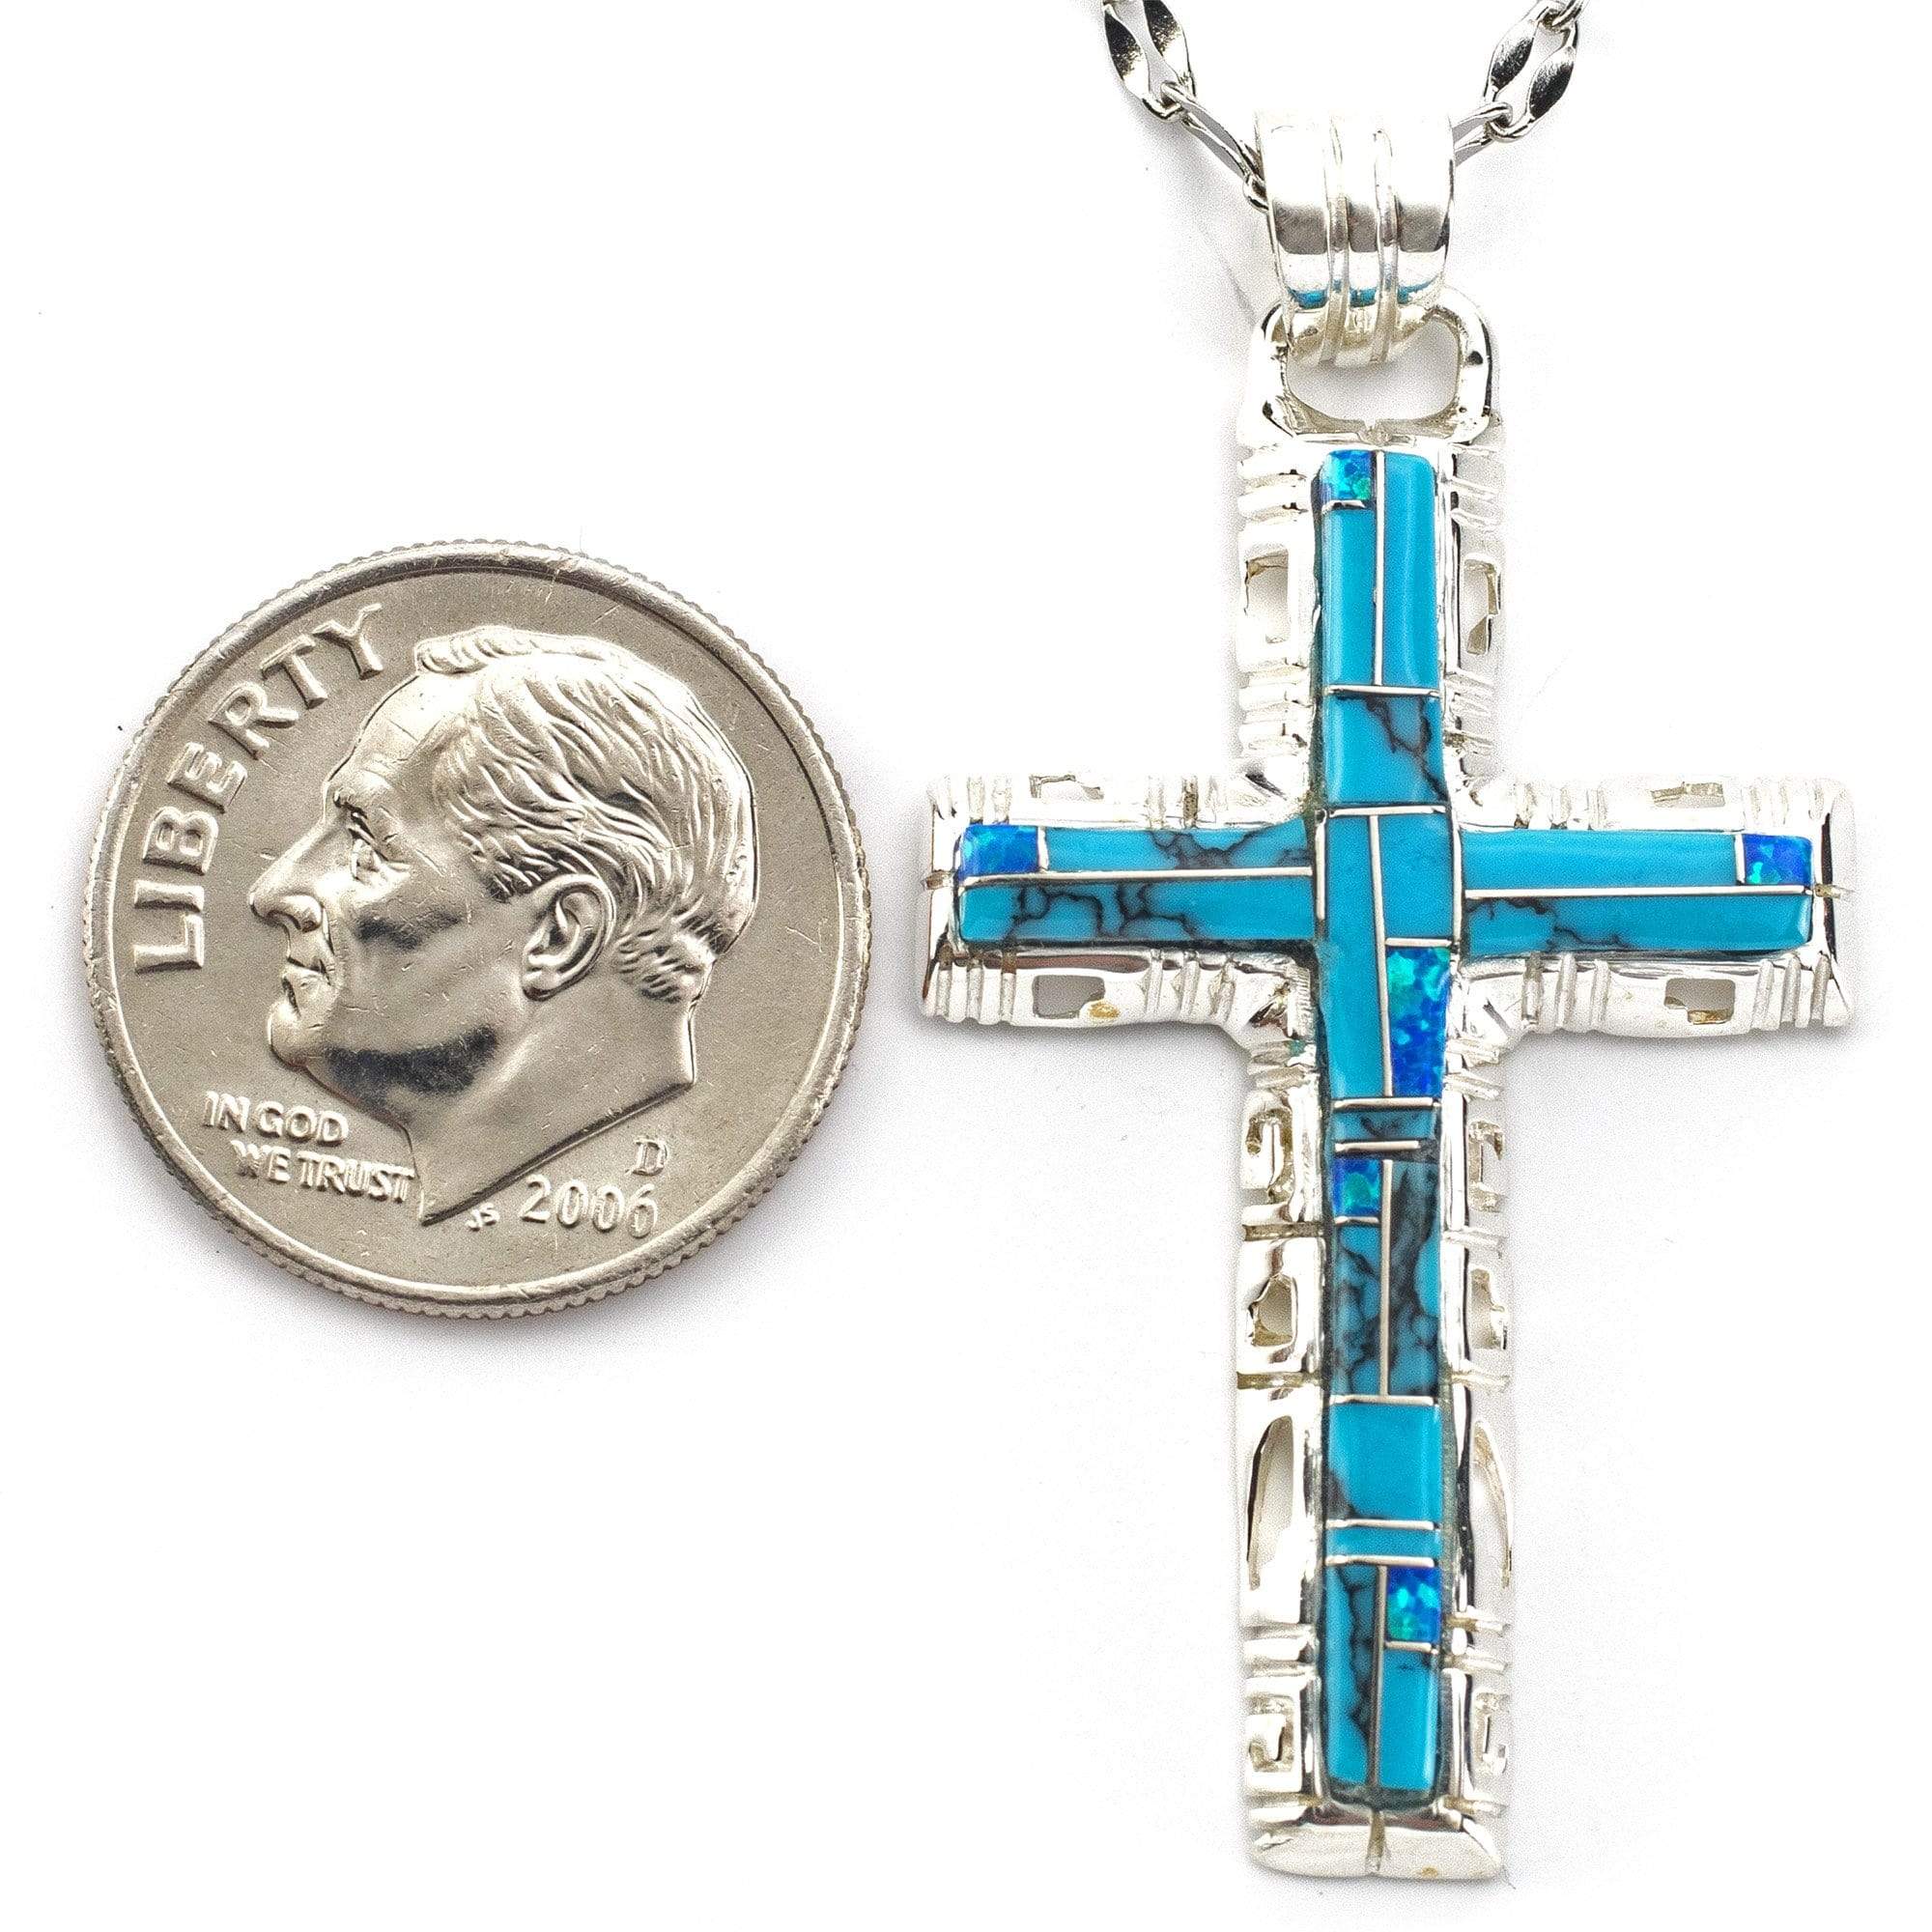 Kalifano Southwest Silver Jewelry Turquoise Cross 925 Sterling Silver Pendant USA Handmade with Opal Accent NMN.0587.TQ